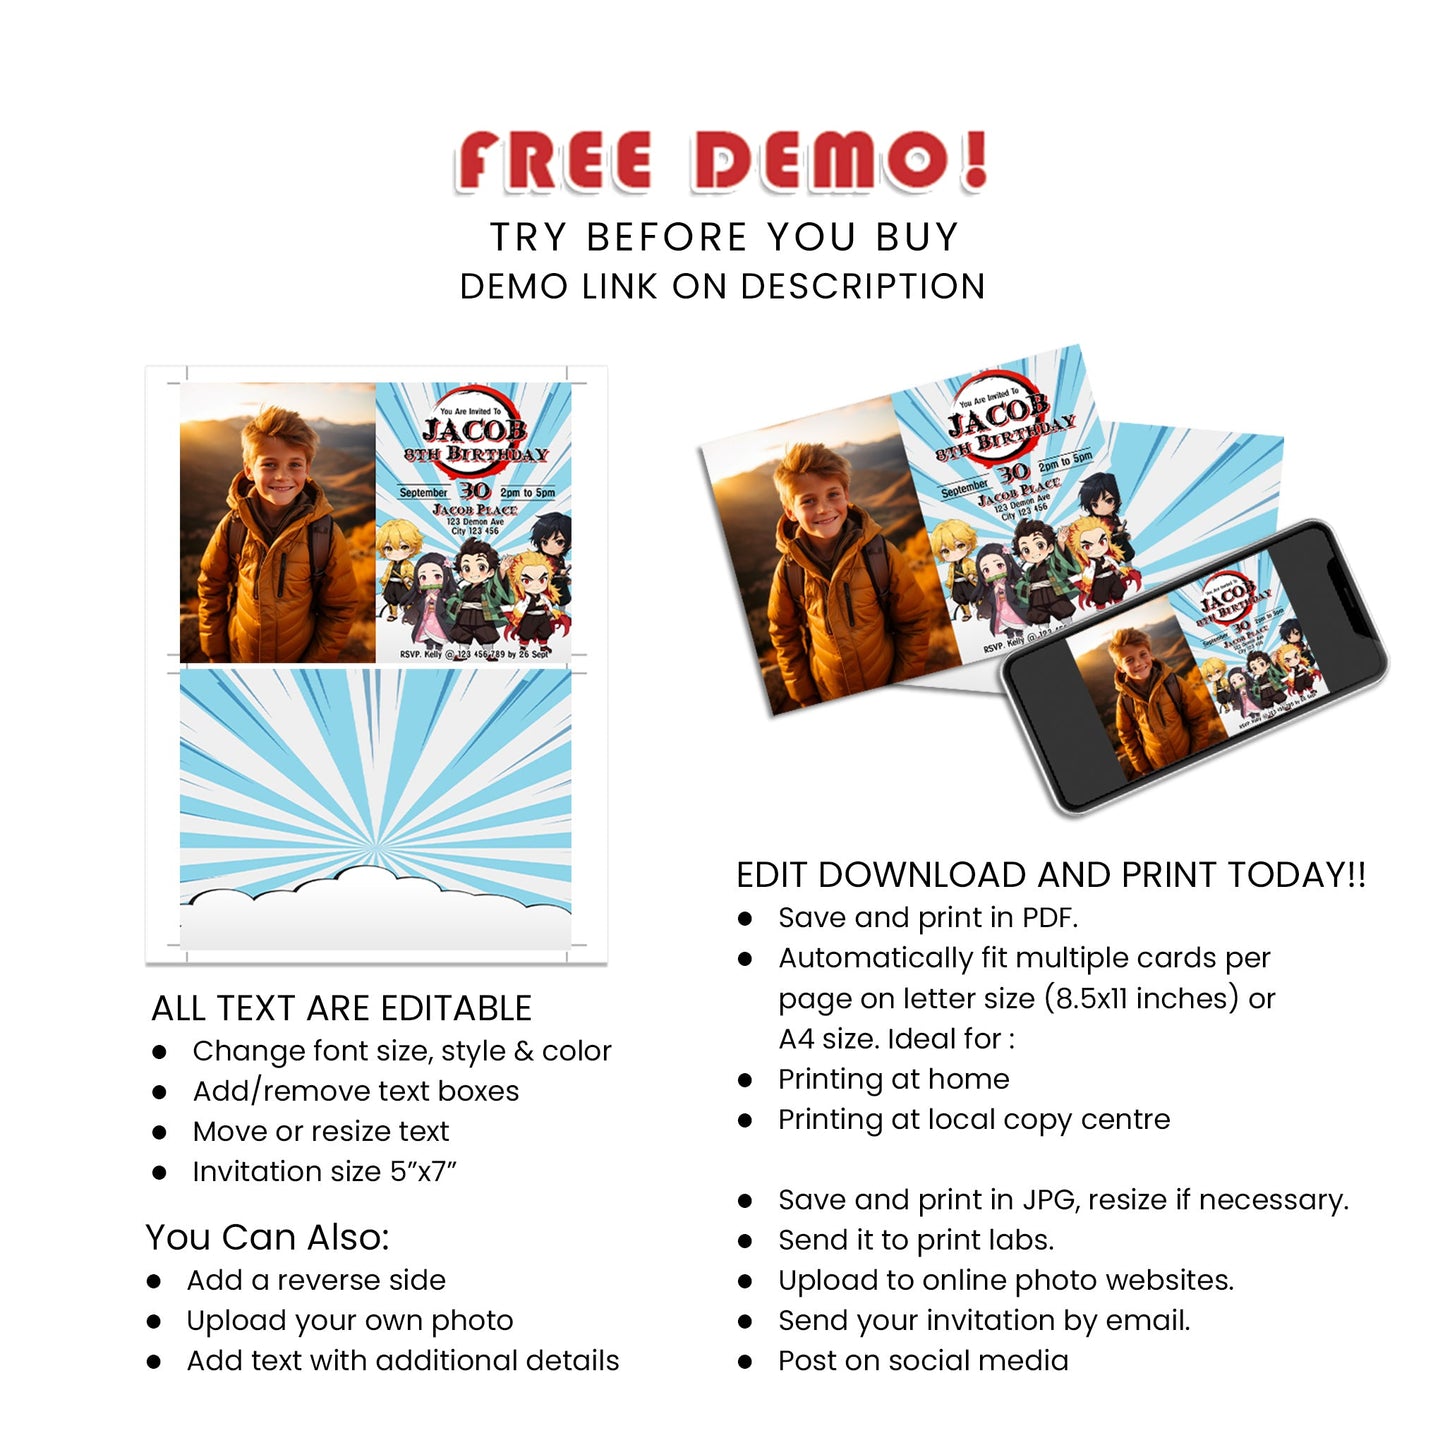 Demon Slayer Personalized Photo Card Invitations : Personalized Demon Slayer Photo Card Invitations for Your Event